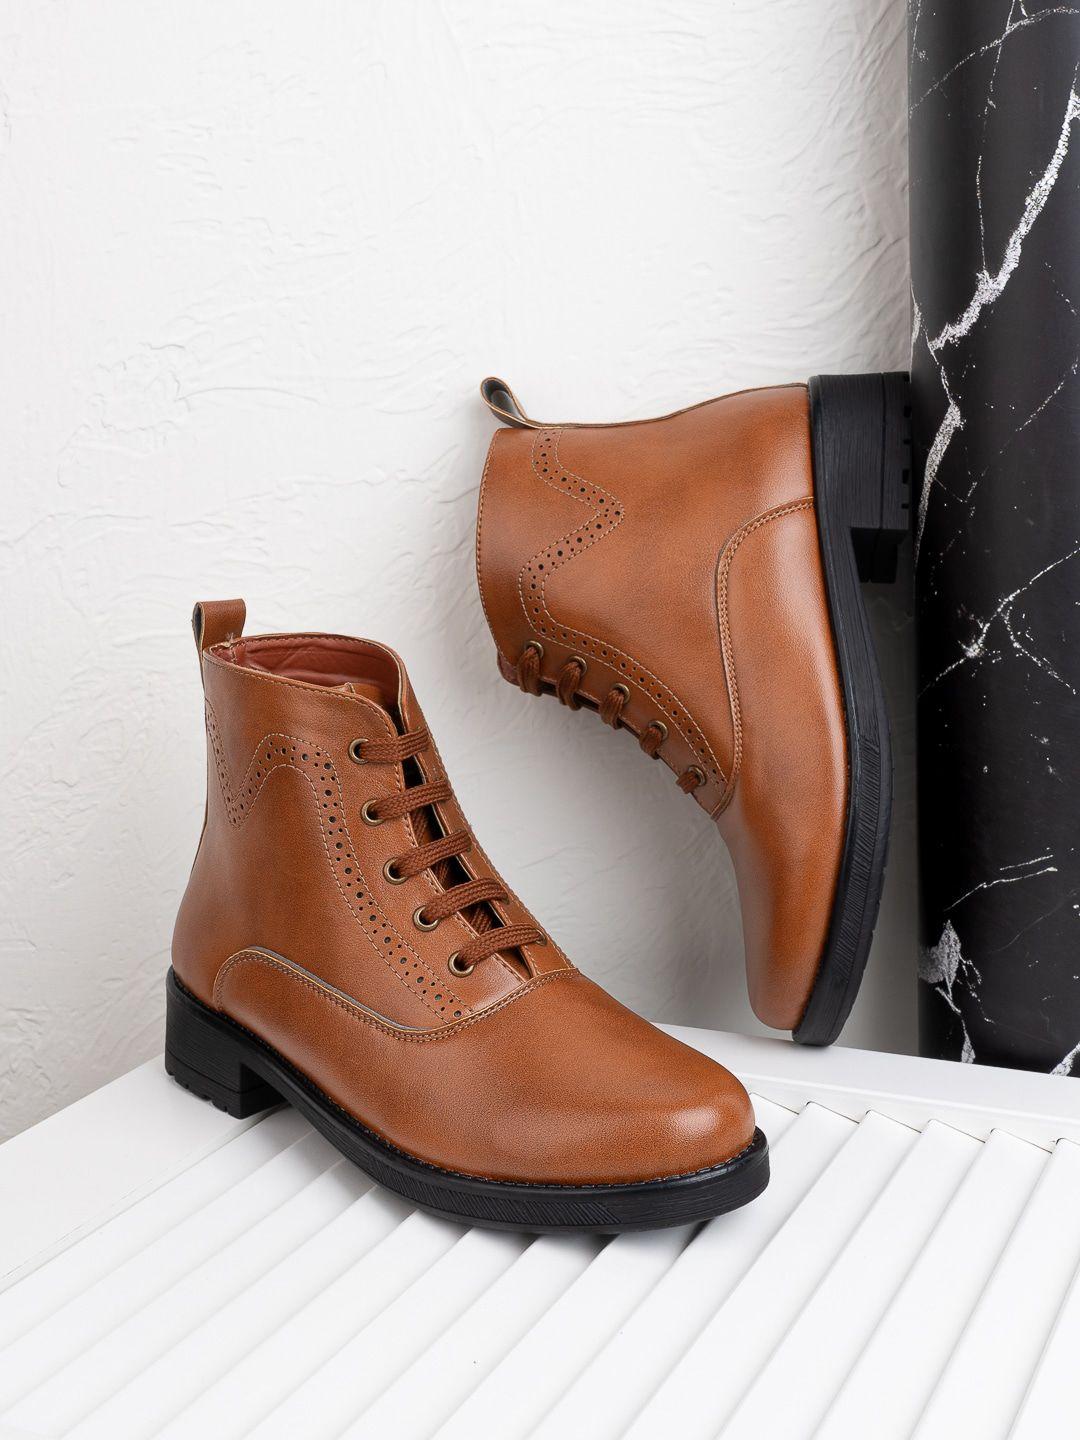 the roadster lifestyle co. women tan mid-top heeled boots